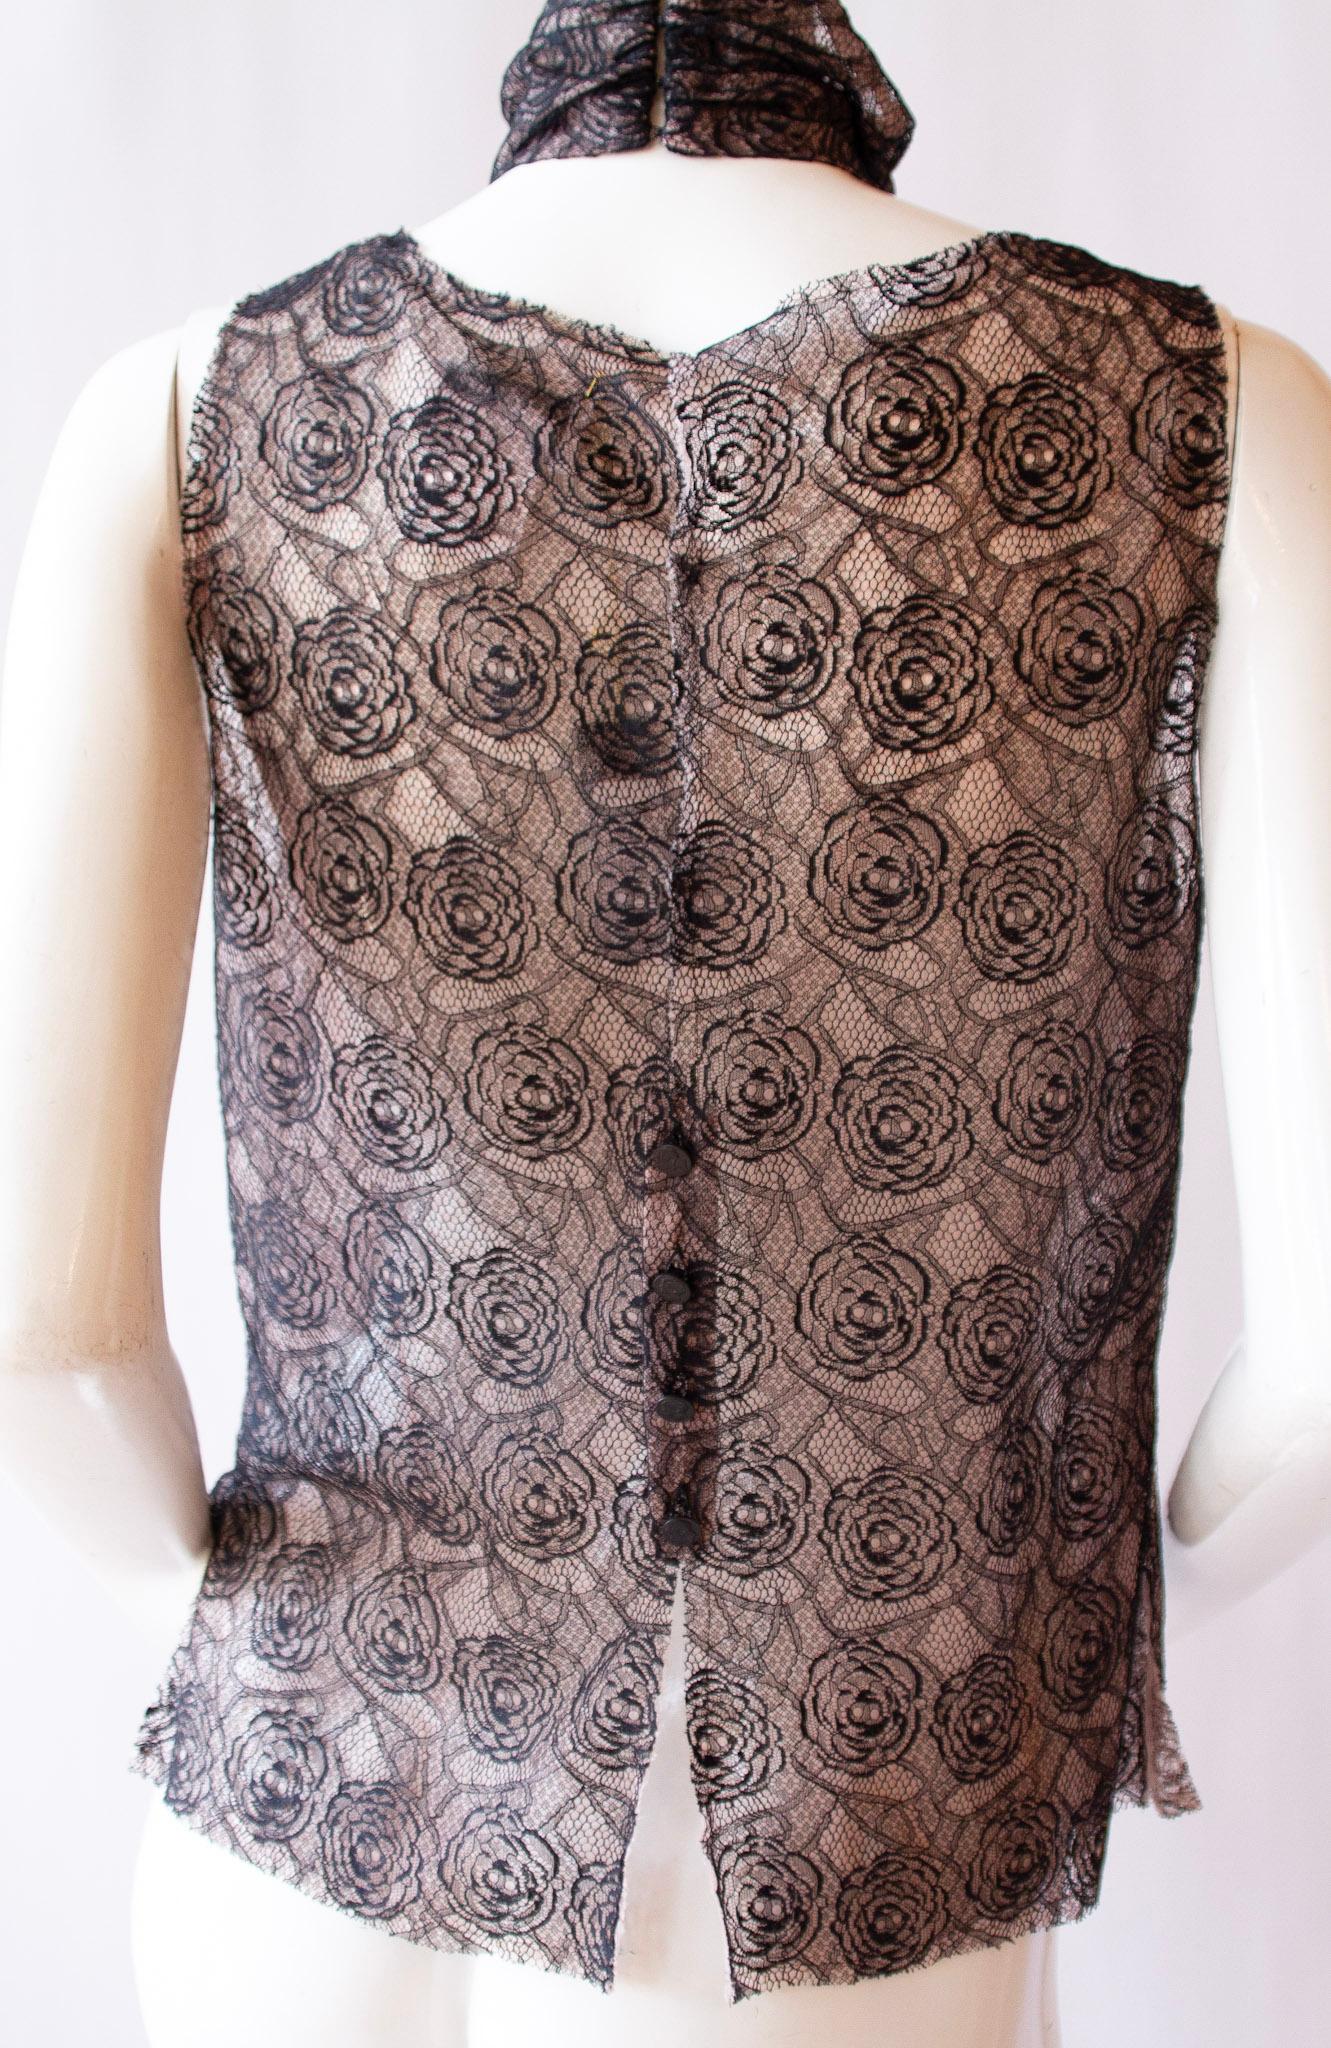 Black 2000s Chanel Camellia Chantilly Lace Top with Ruffle Cravat